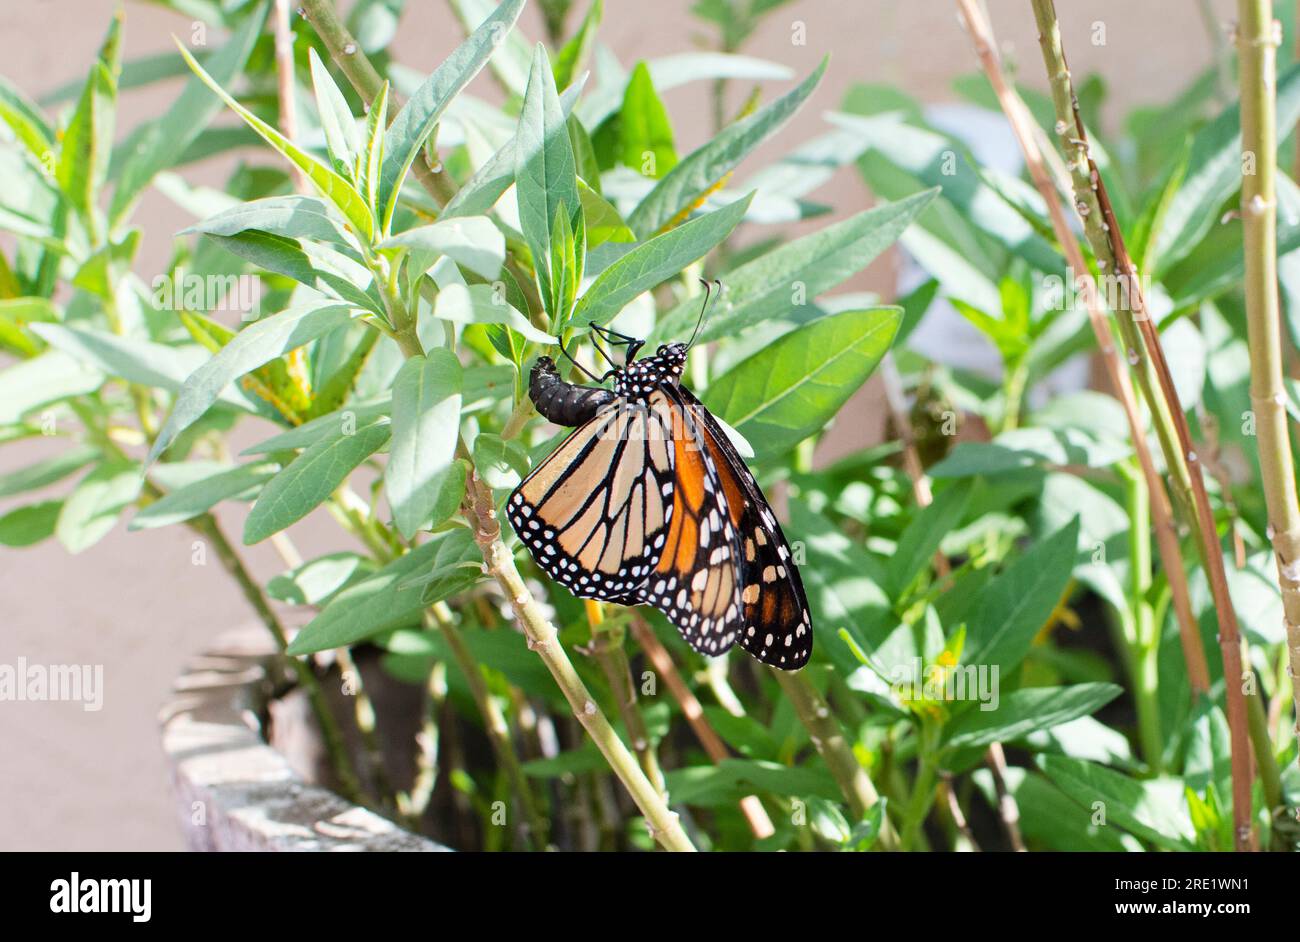 Female Monarch butterfly laying an egg on the underside of a milkweed plant leaf Stock Photo